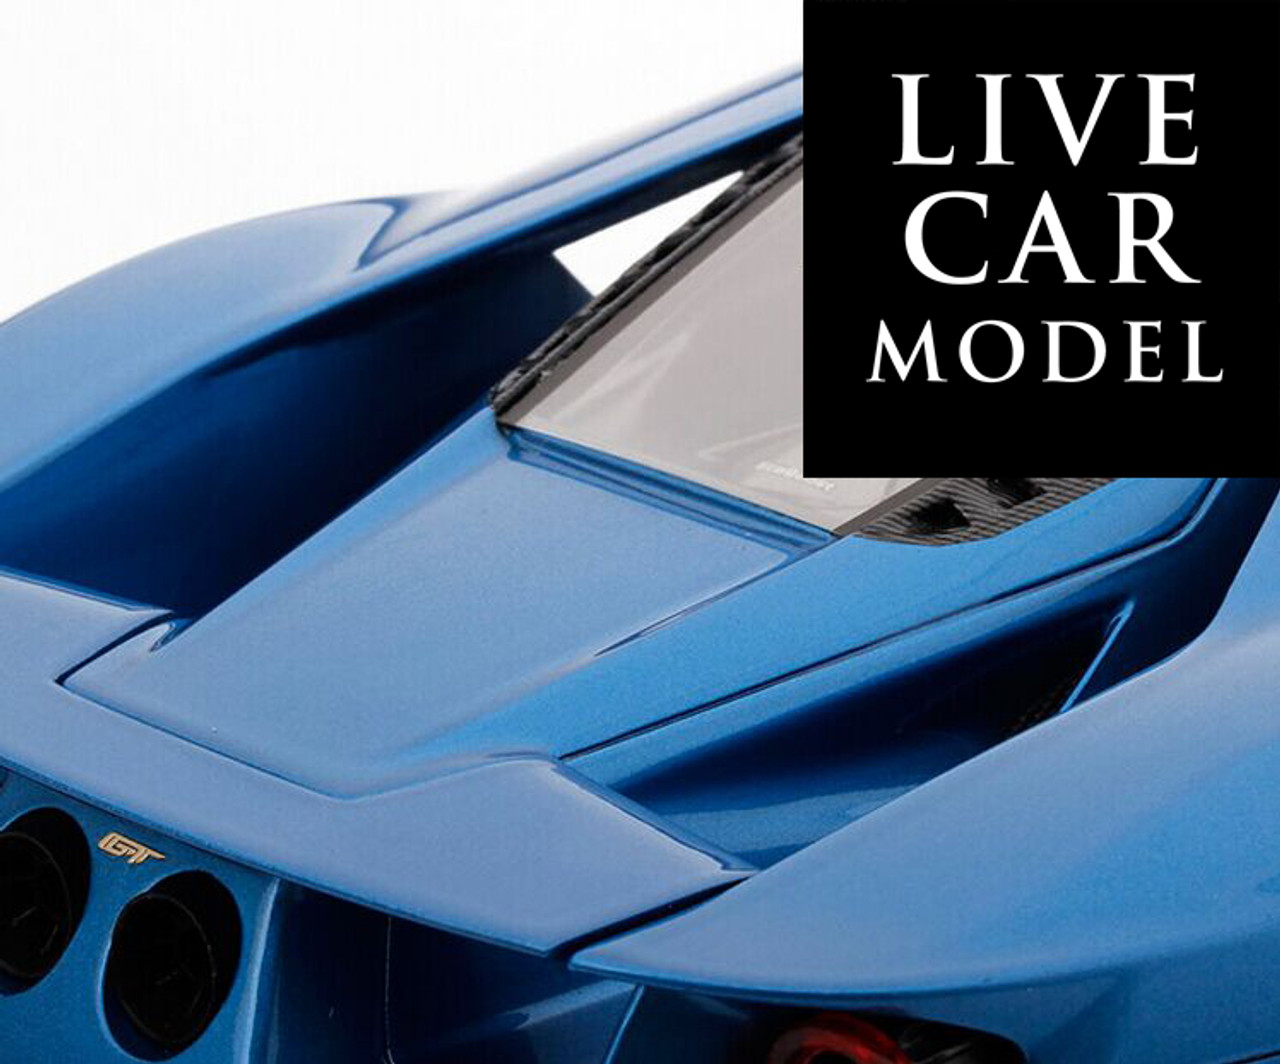 1/18 Top Speed Ford GT (Blue) Resin Car Model Limited